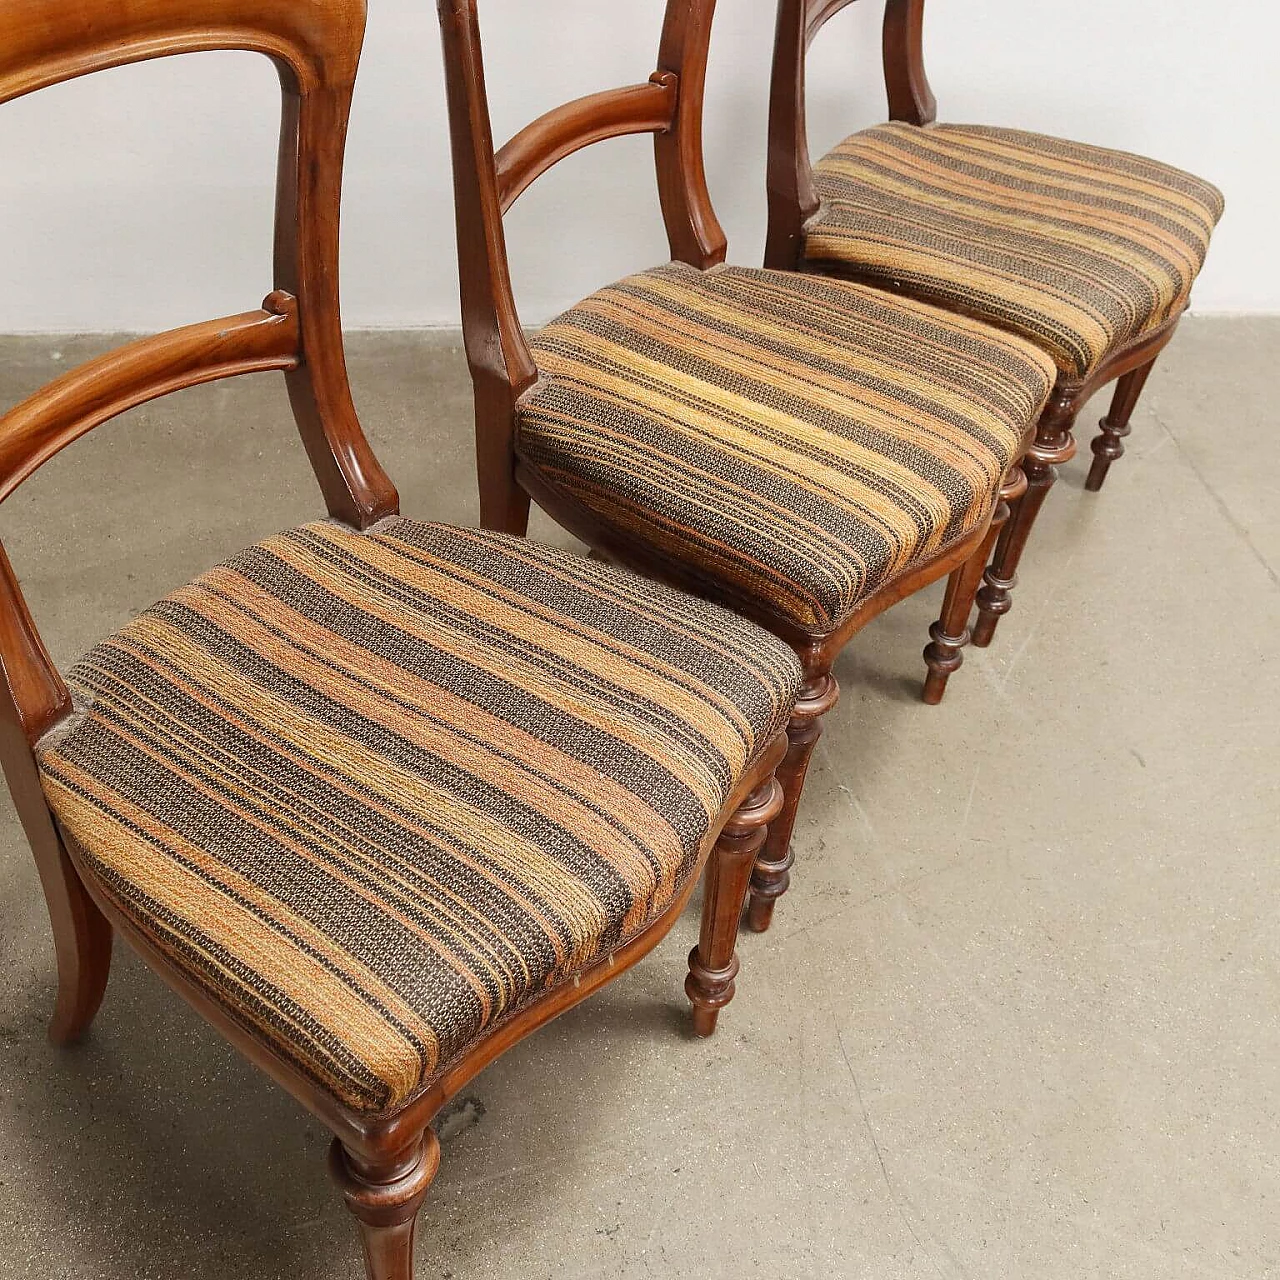 6 Chairs in walnut and fabric, second half of the 19th century 8